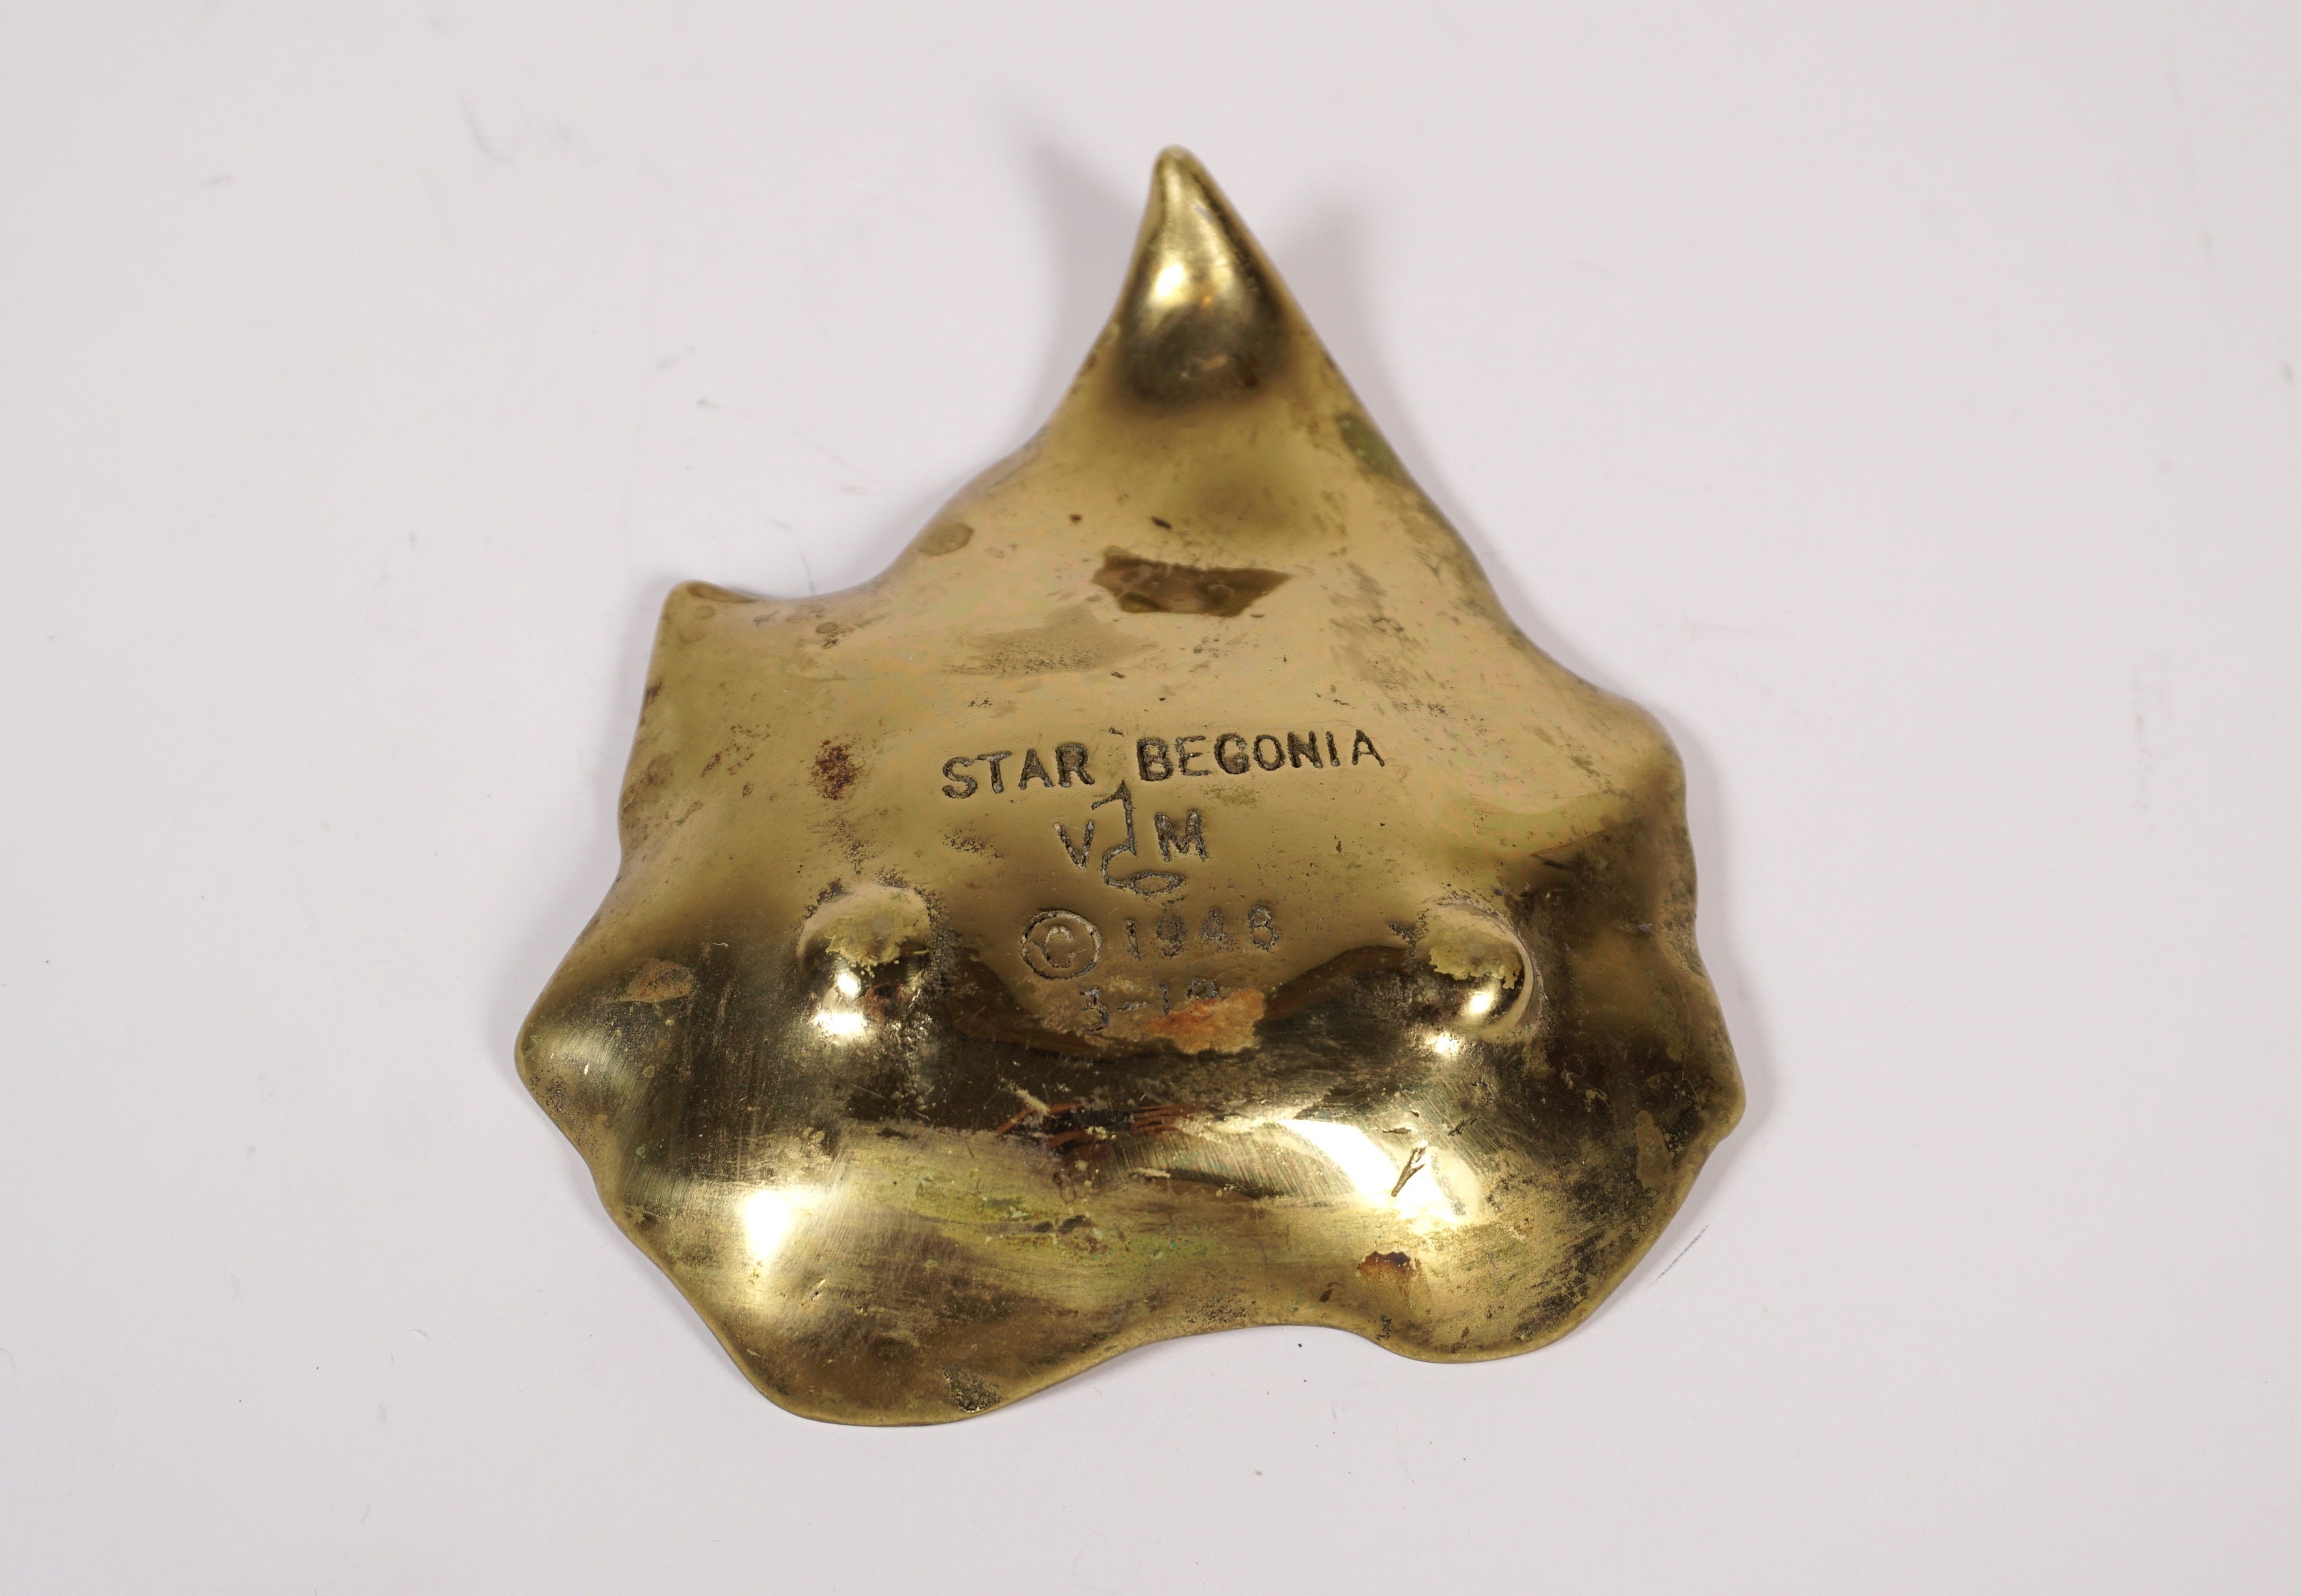 Vintage Brass leaf coin or jewelry dish Star Begonia